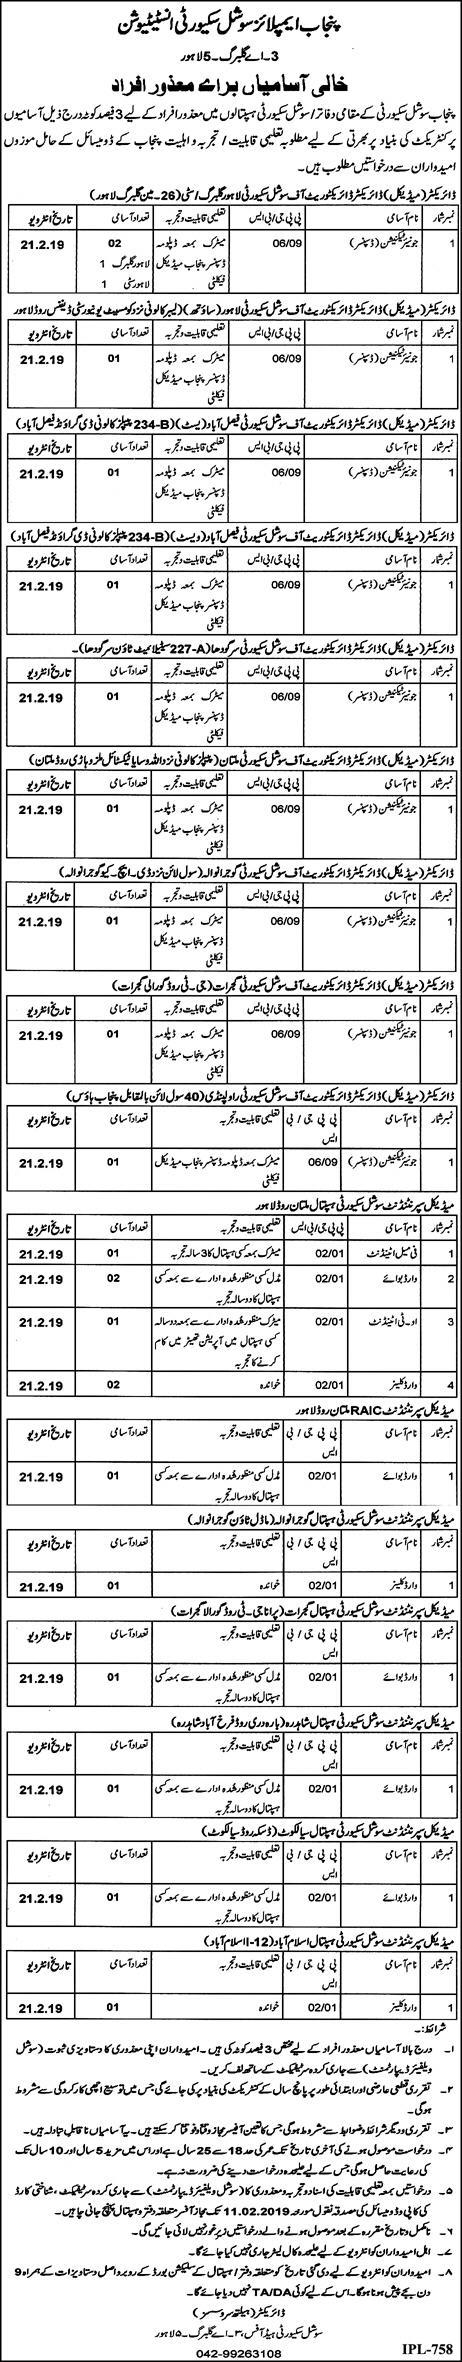 Punjab Employees Social Security Institution (PESSI) Jobs 2019 for 22+ Junior Technicians & Support Staff